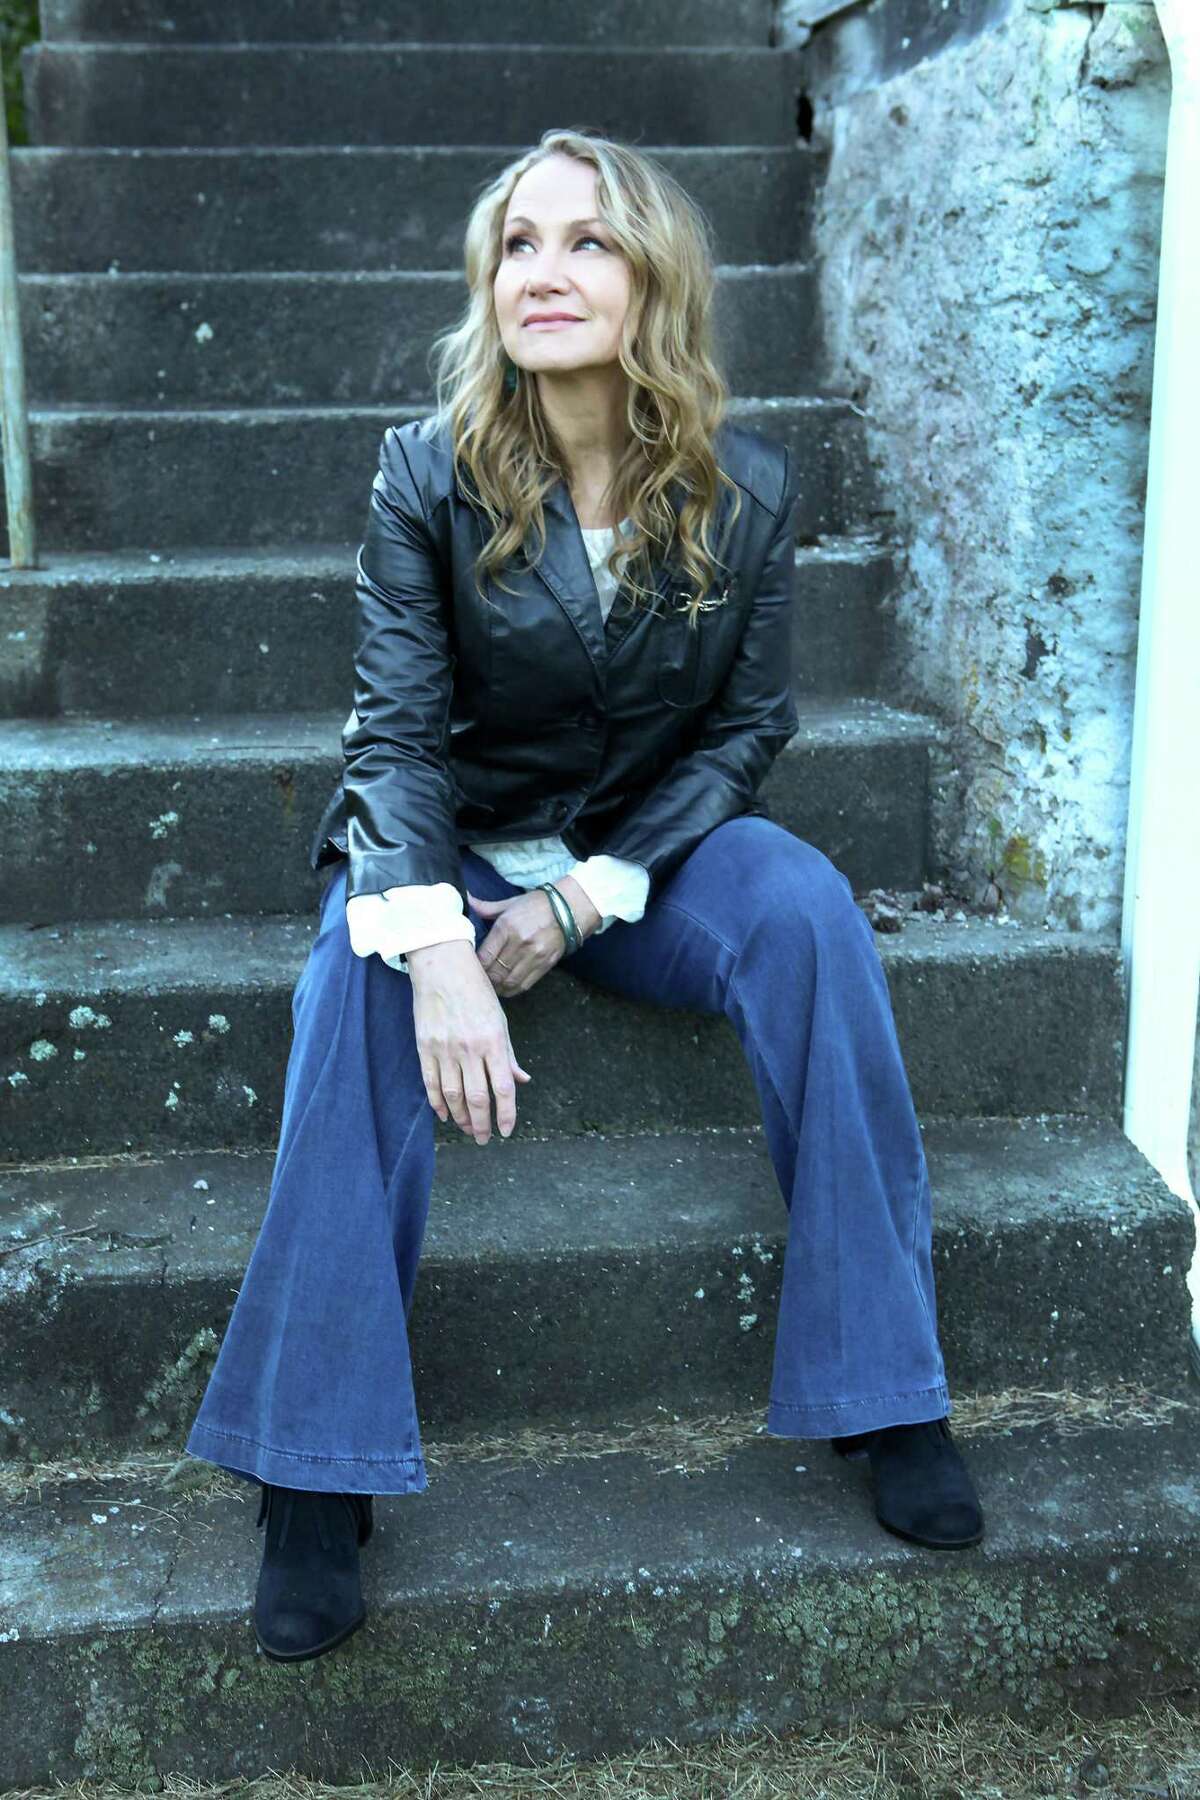 Joan Osborne will perform at Daryl’s House Club in Pawling, N.Y., on April 19.